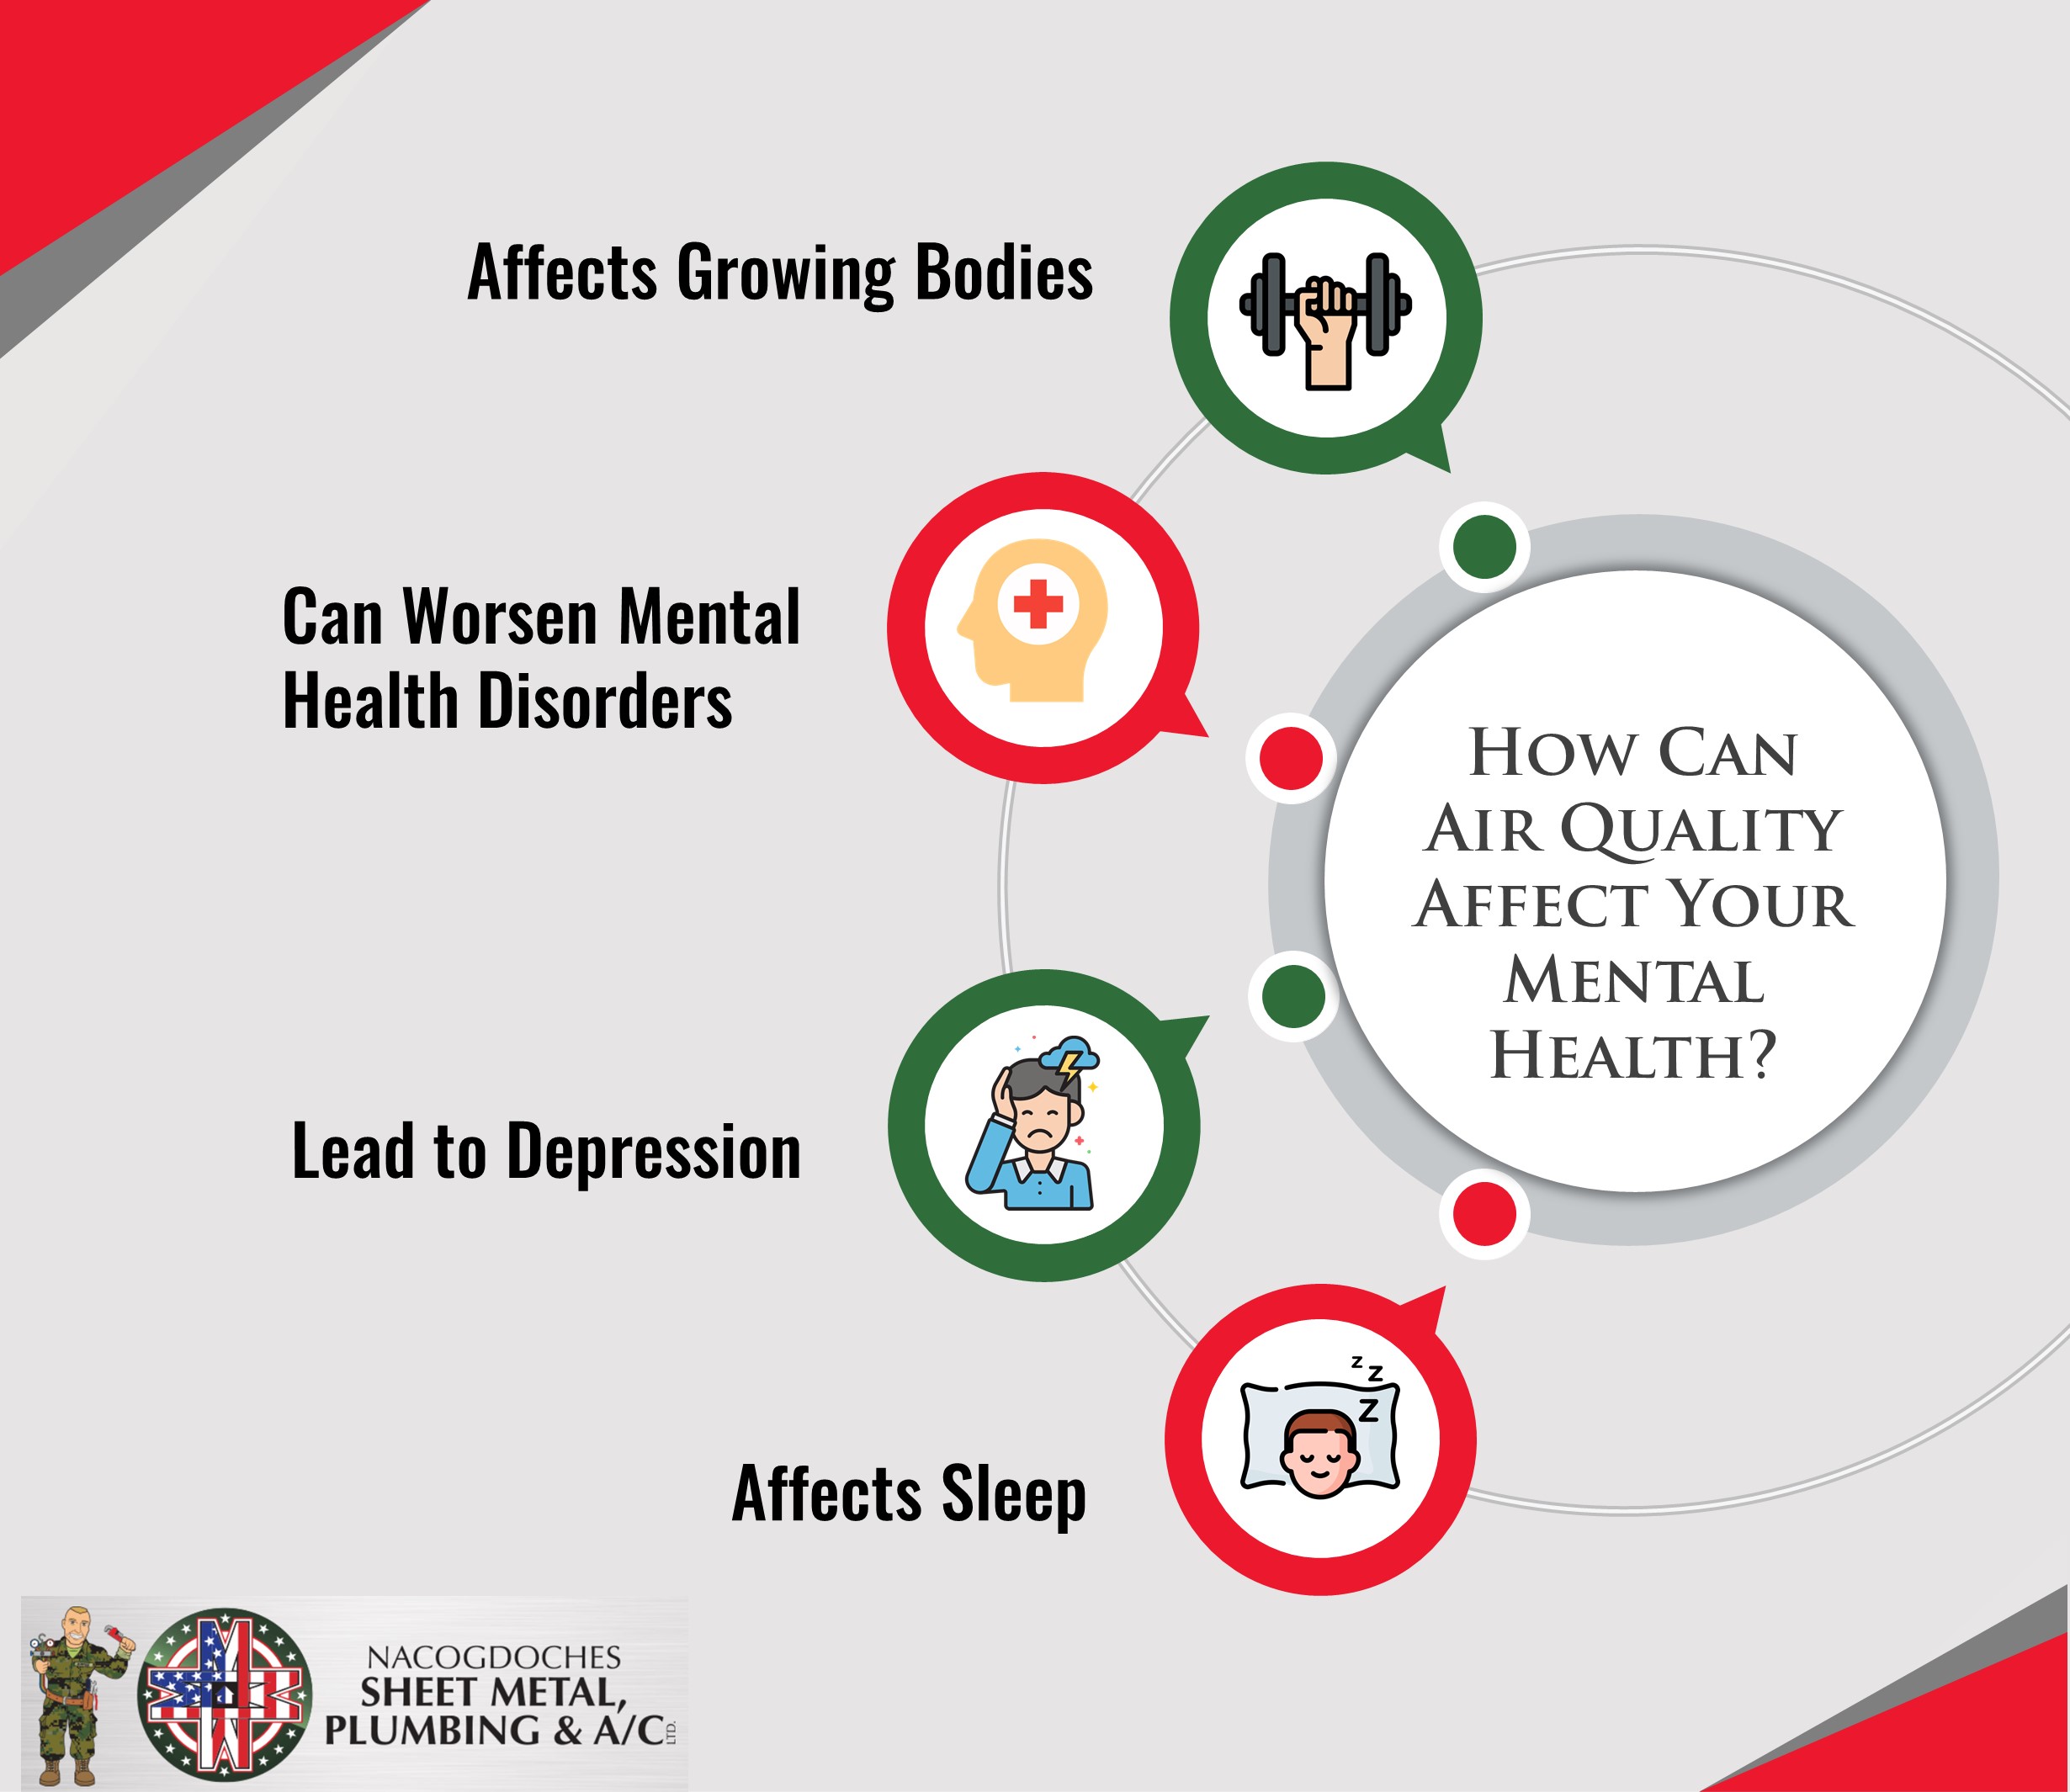 How Can Air Quality Affect Your Mental Health?